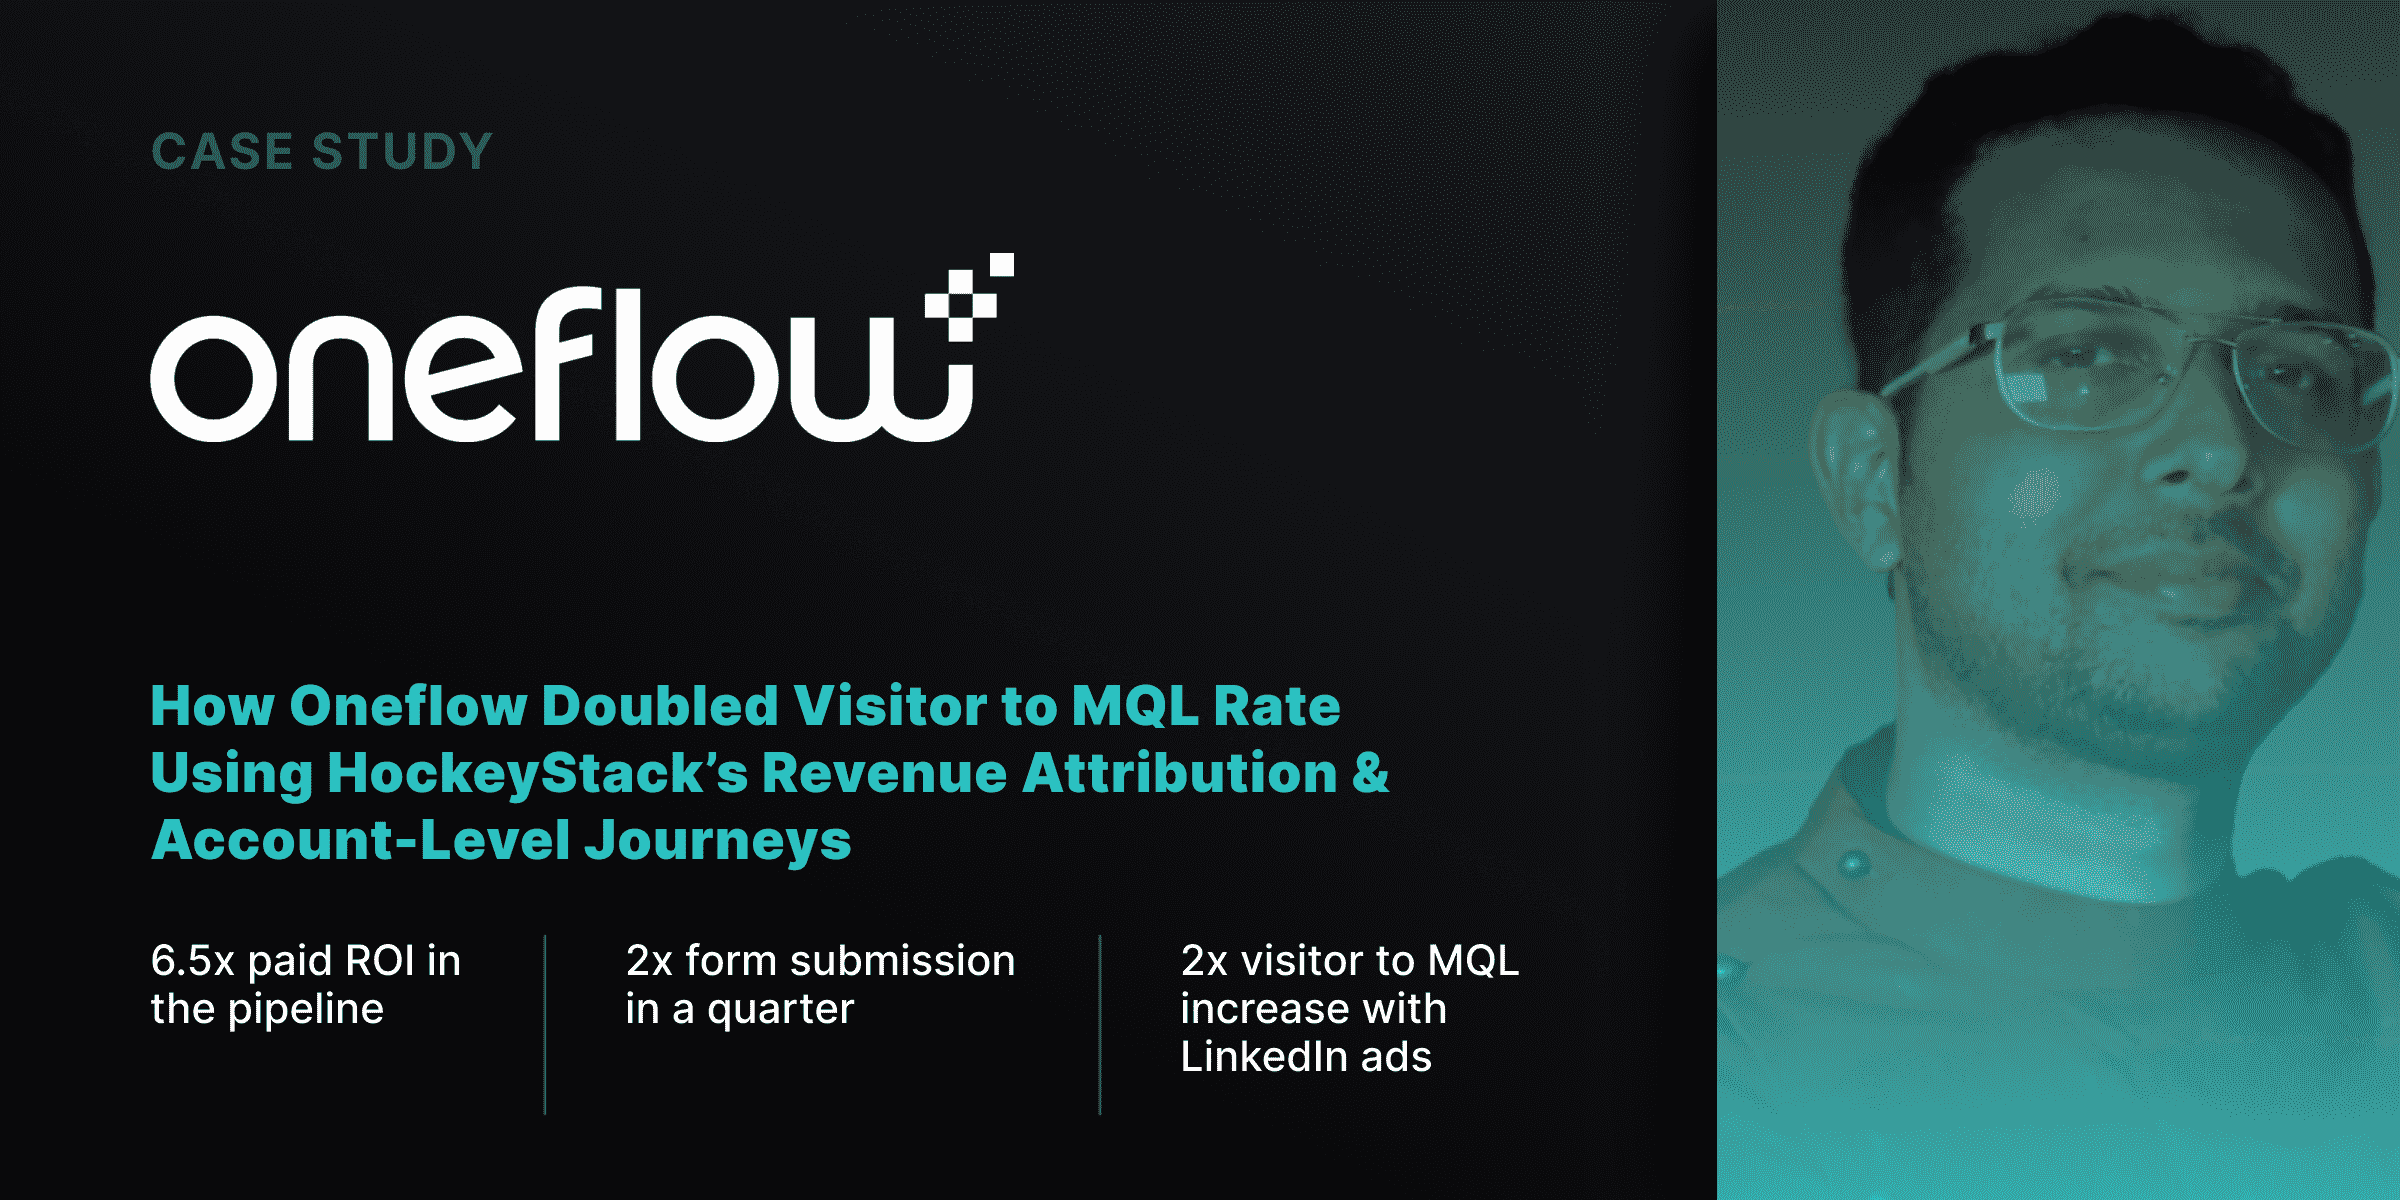 Oneflow Doubles Visitor to MQL Rate Using HockeyStack’s Revenue Attribution & Account-Level Journeys